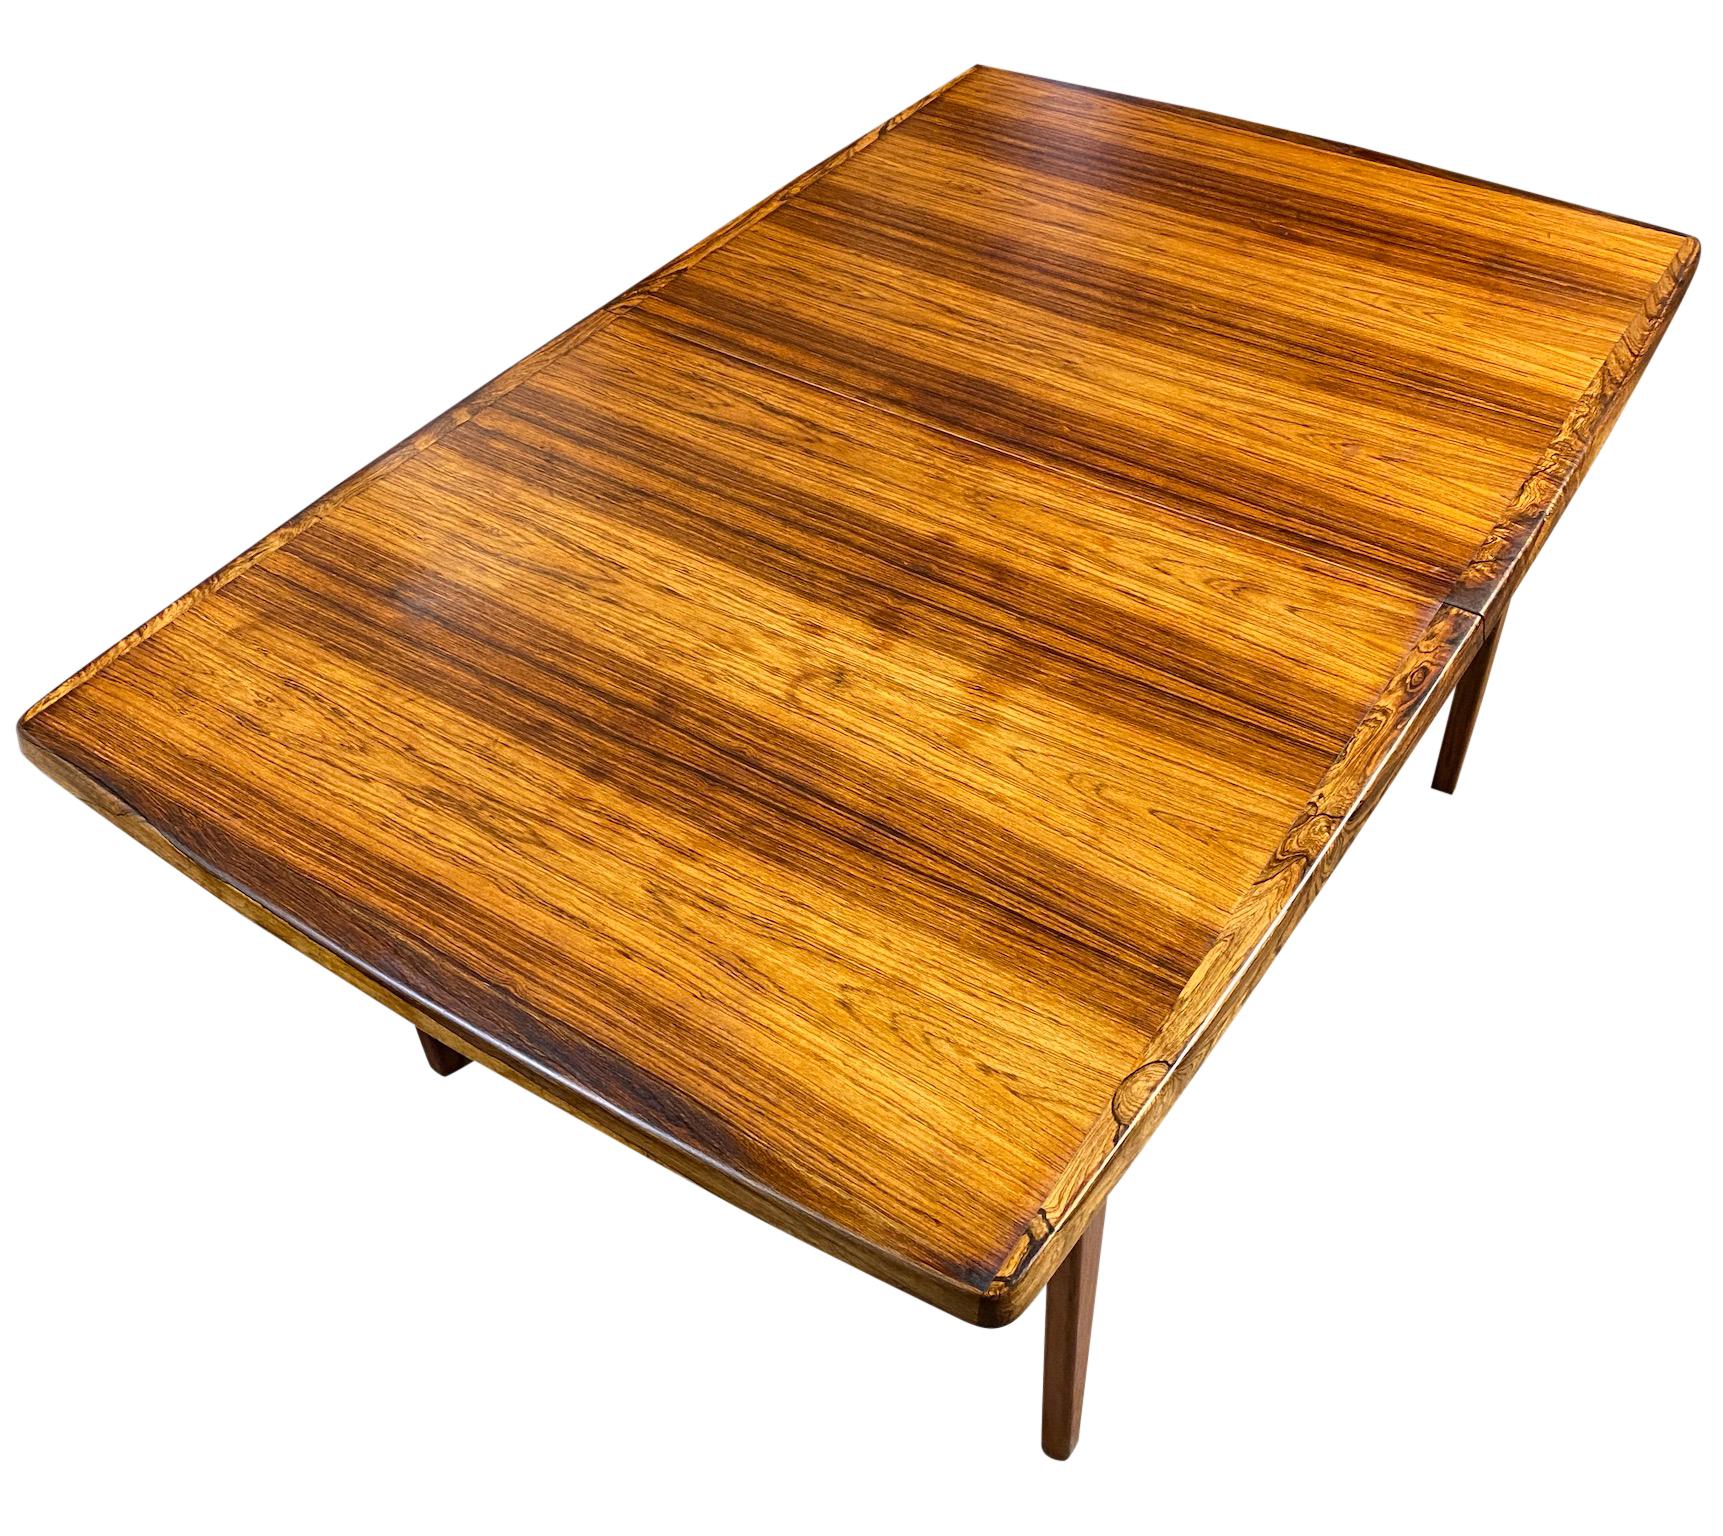 Danish Midcentury Rosewood Expandable Dining Table with 2 Nesting Leaves